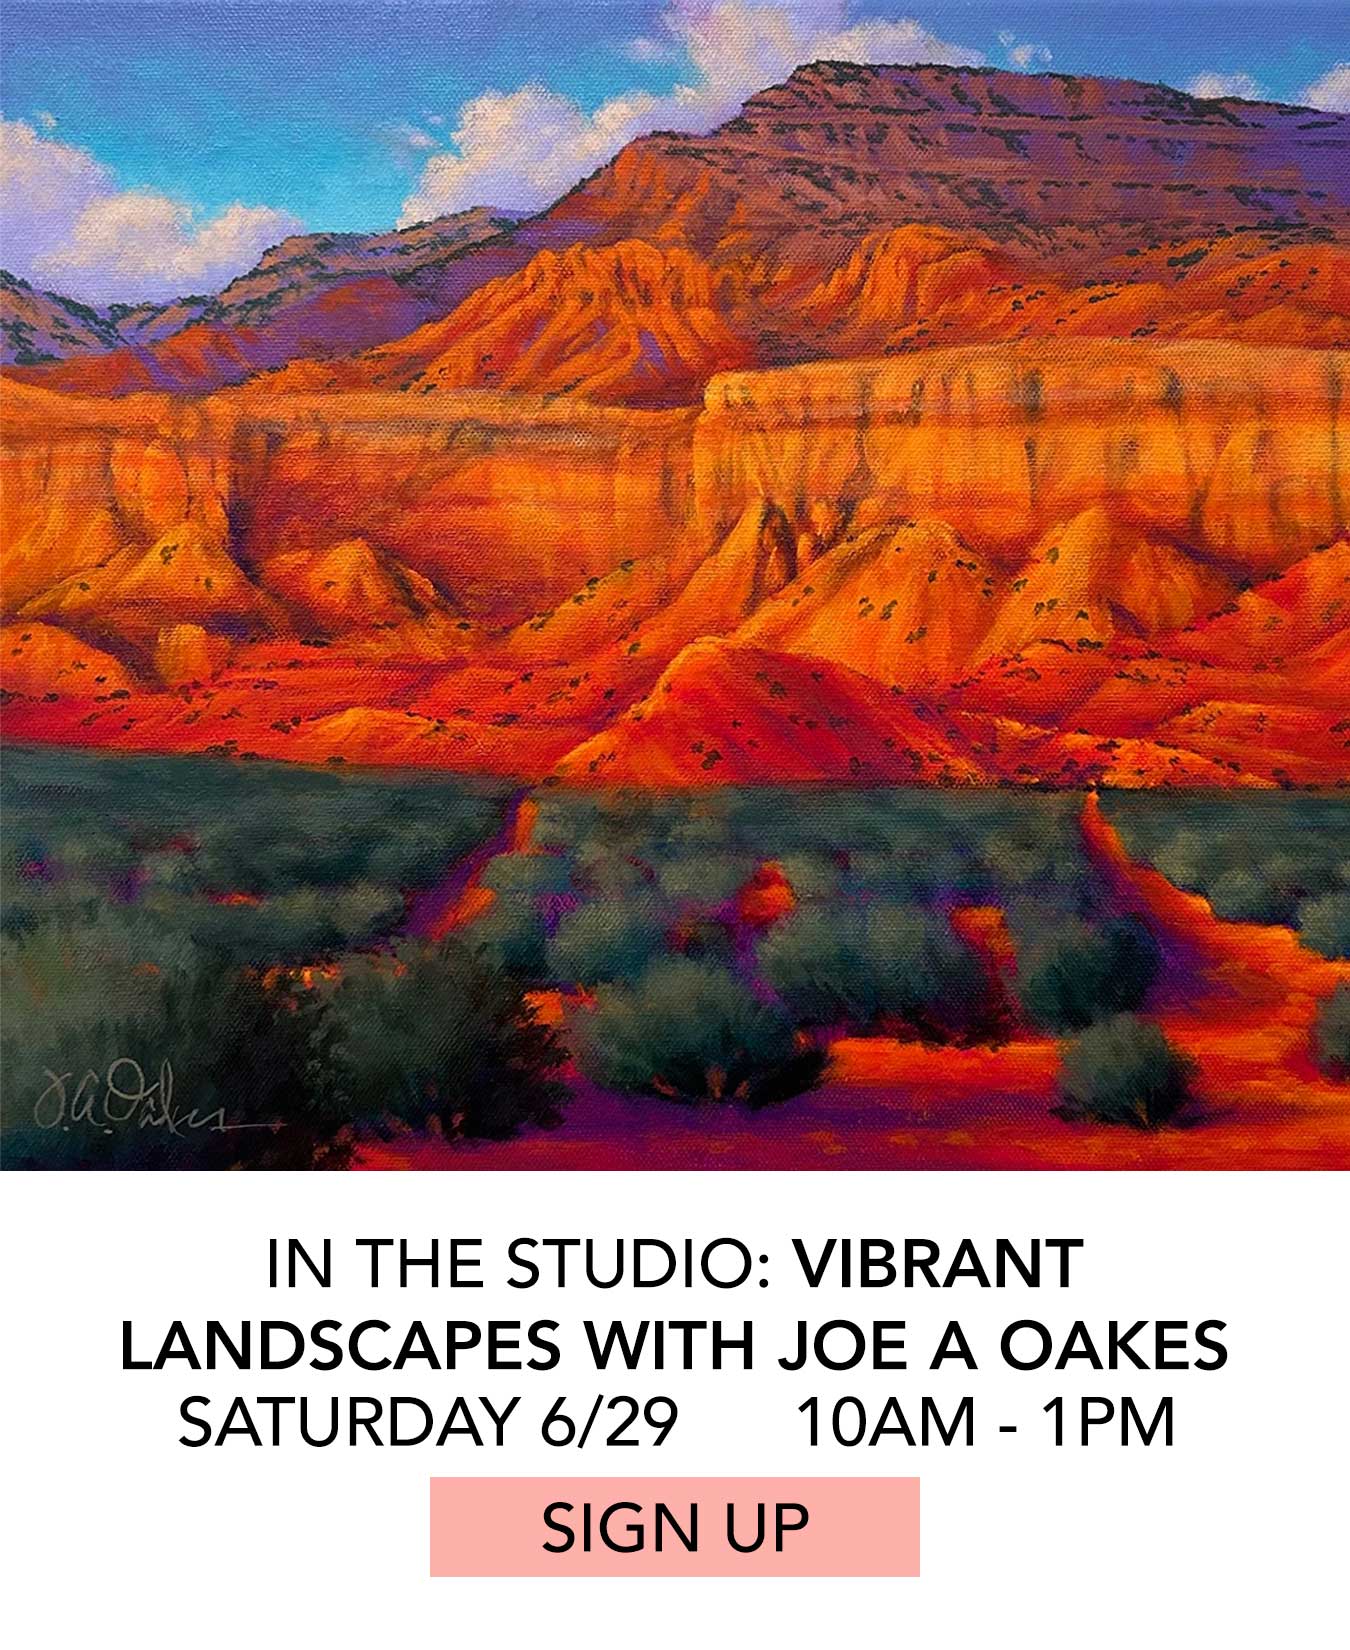 In the Studio: Vibrant Landscapes with Joe A Oakes. Saturday 6/29 from 10:00am to 1:00pm. Click to Sign Up.